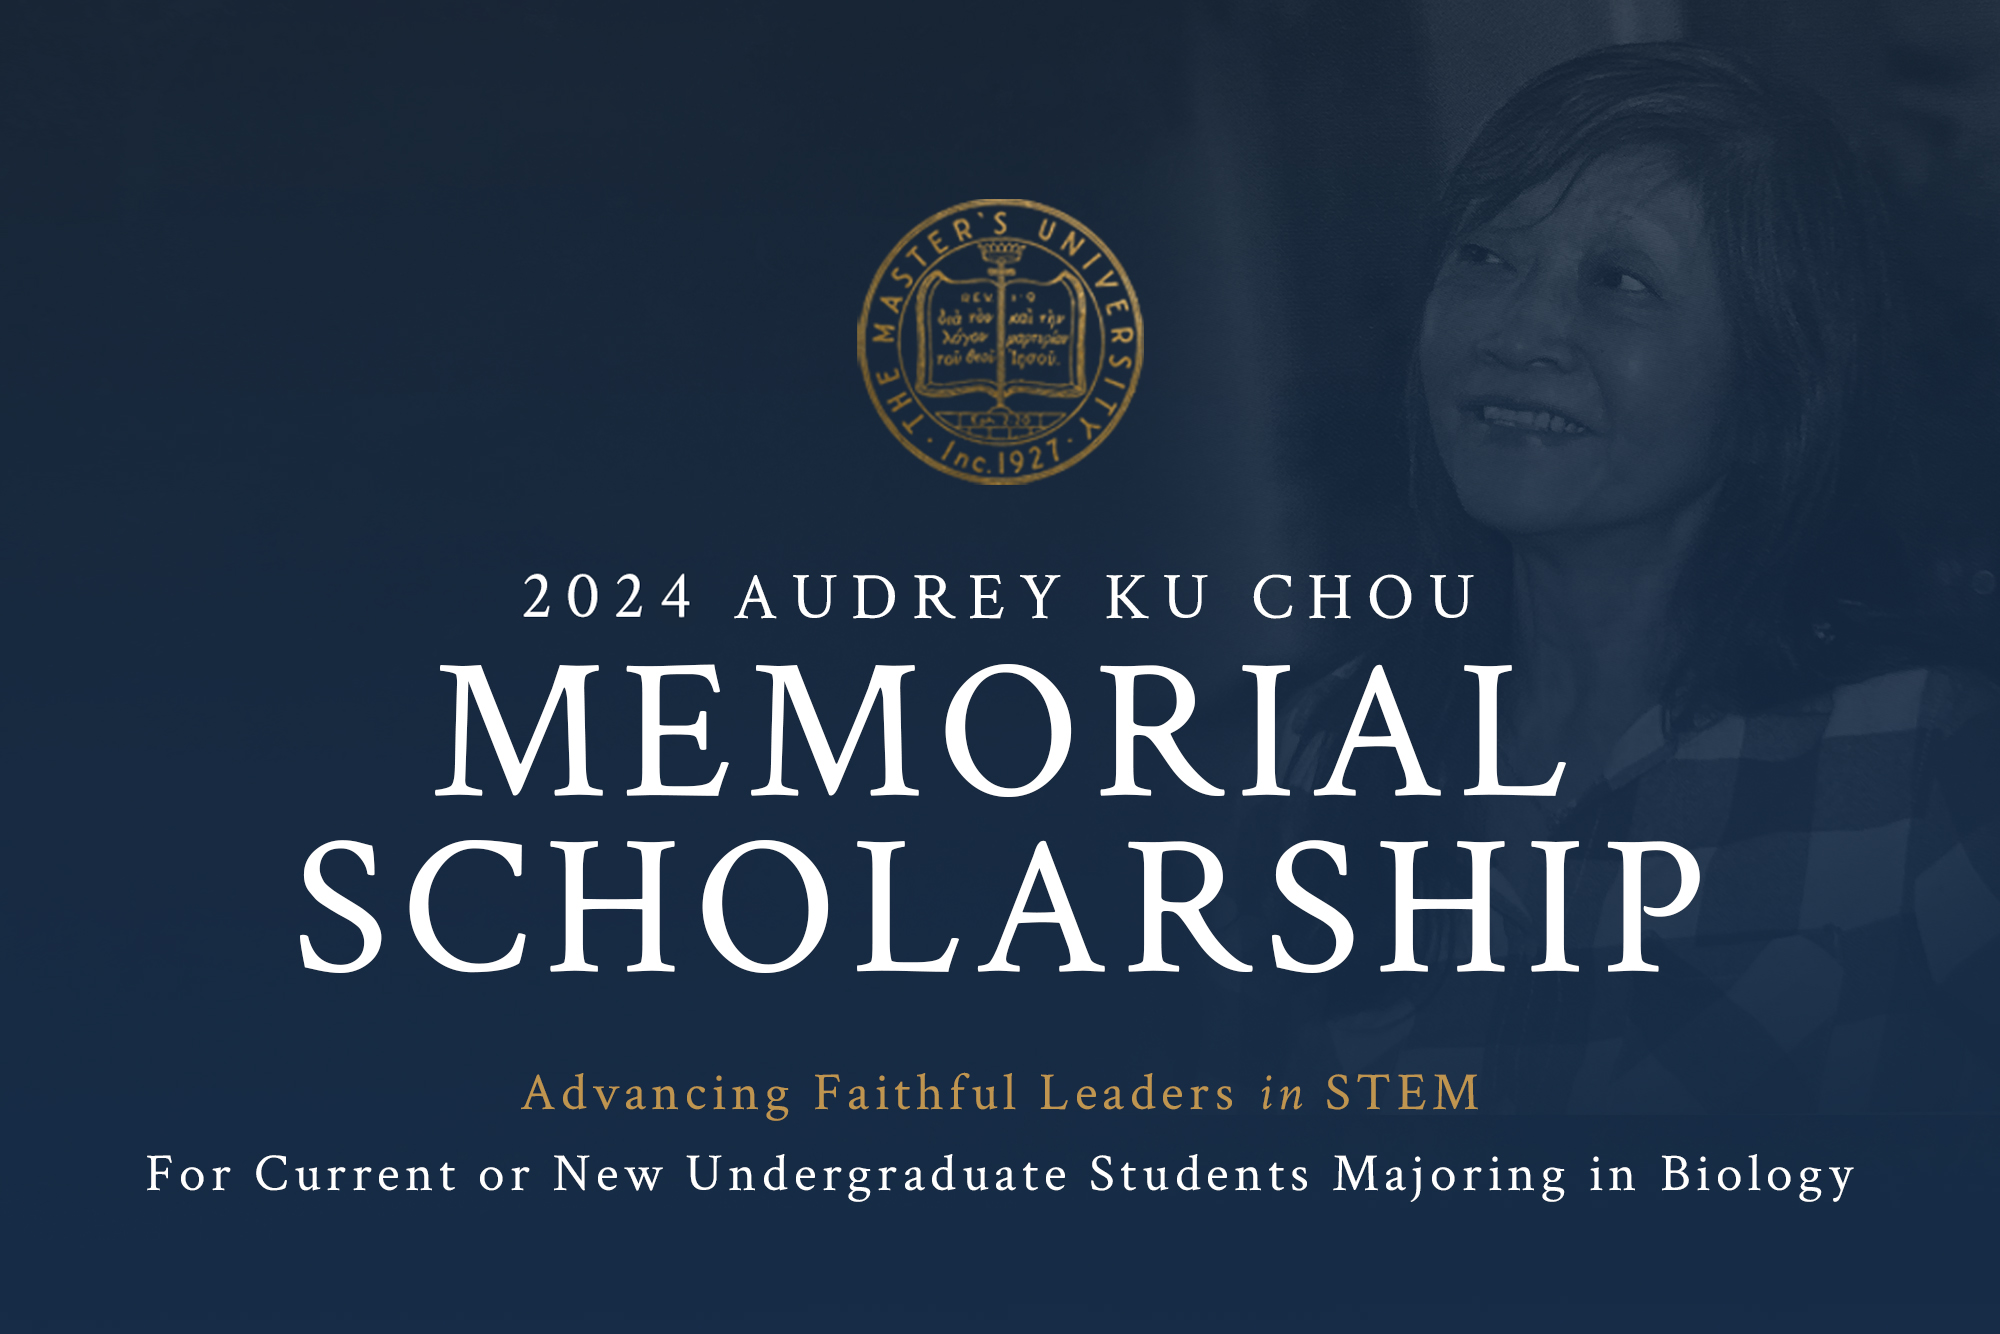 Apply for New STEM Scholarship at TMU by Dec. 1